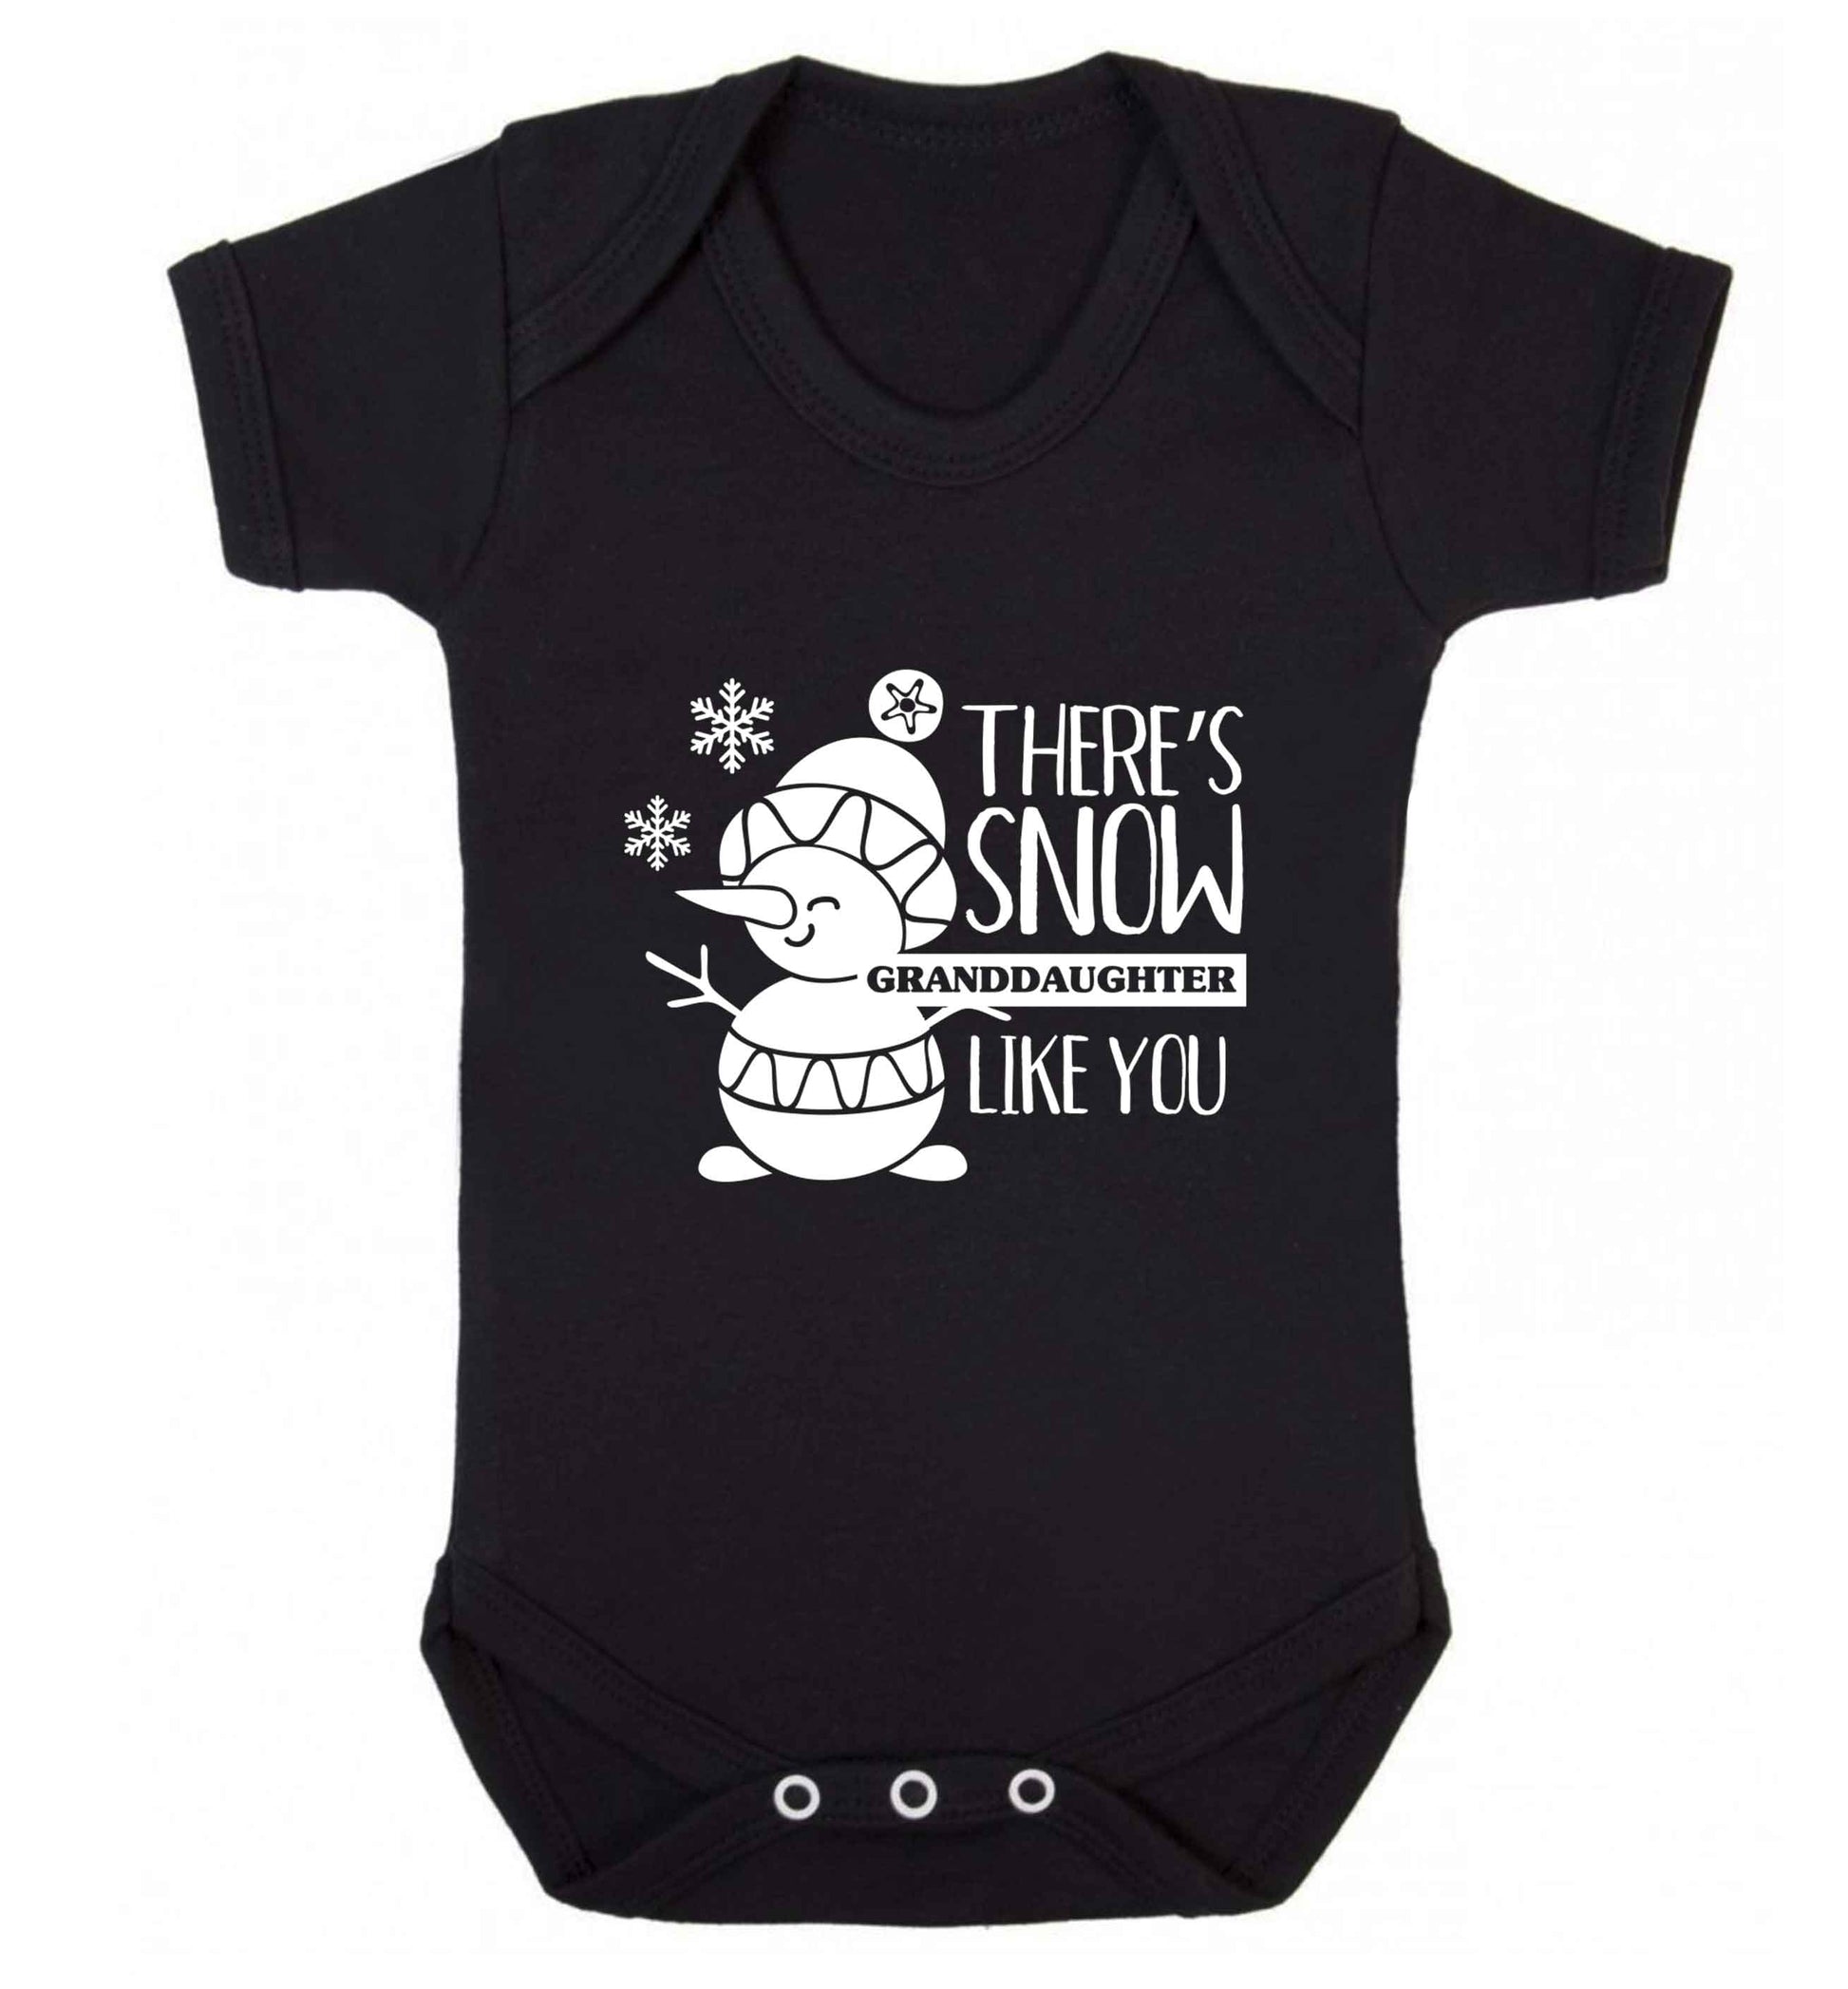 There's snow granddaughter like you baby vest black 18-24 months